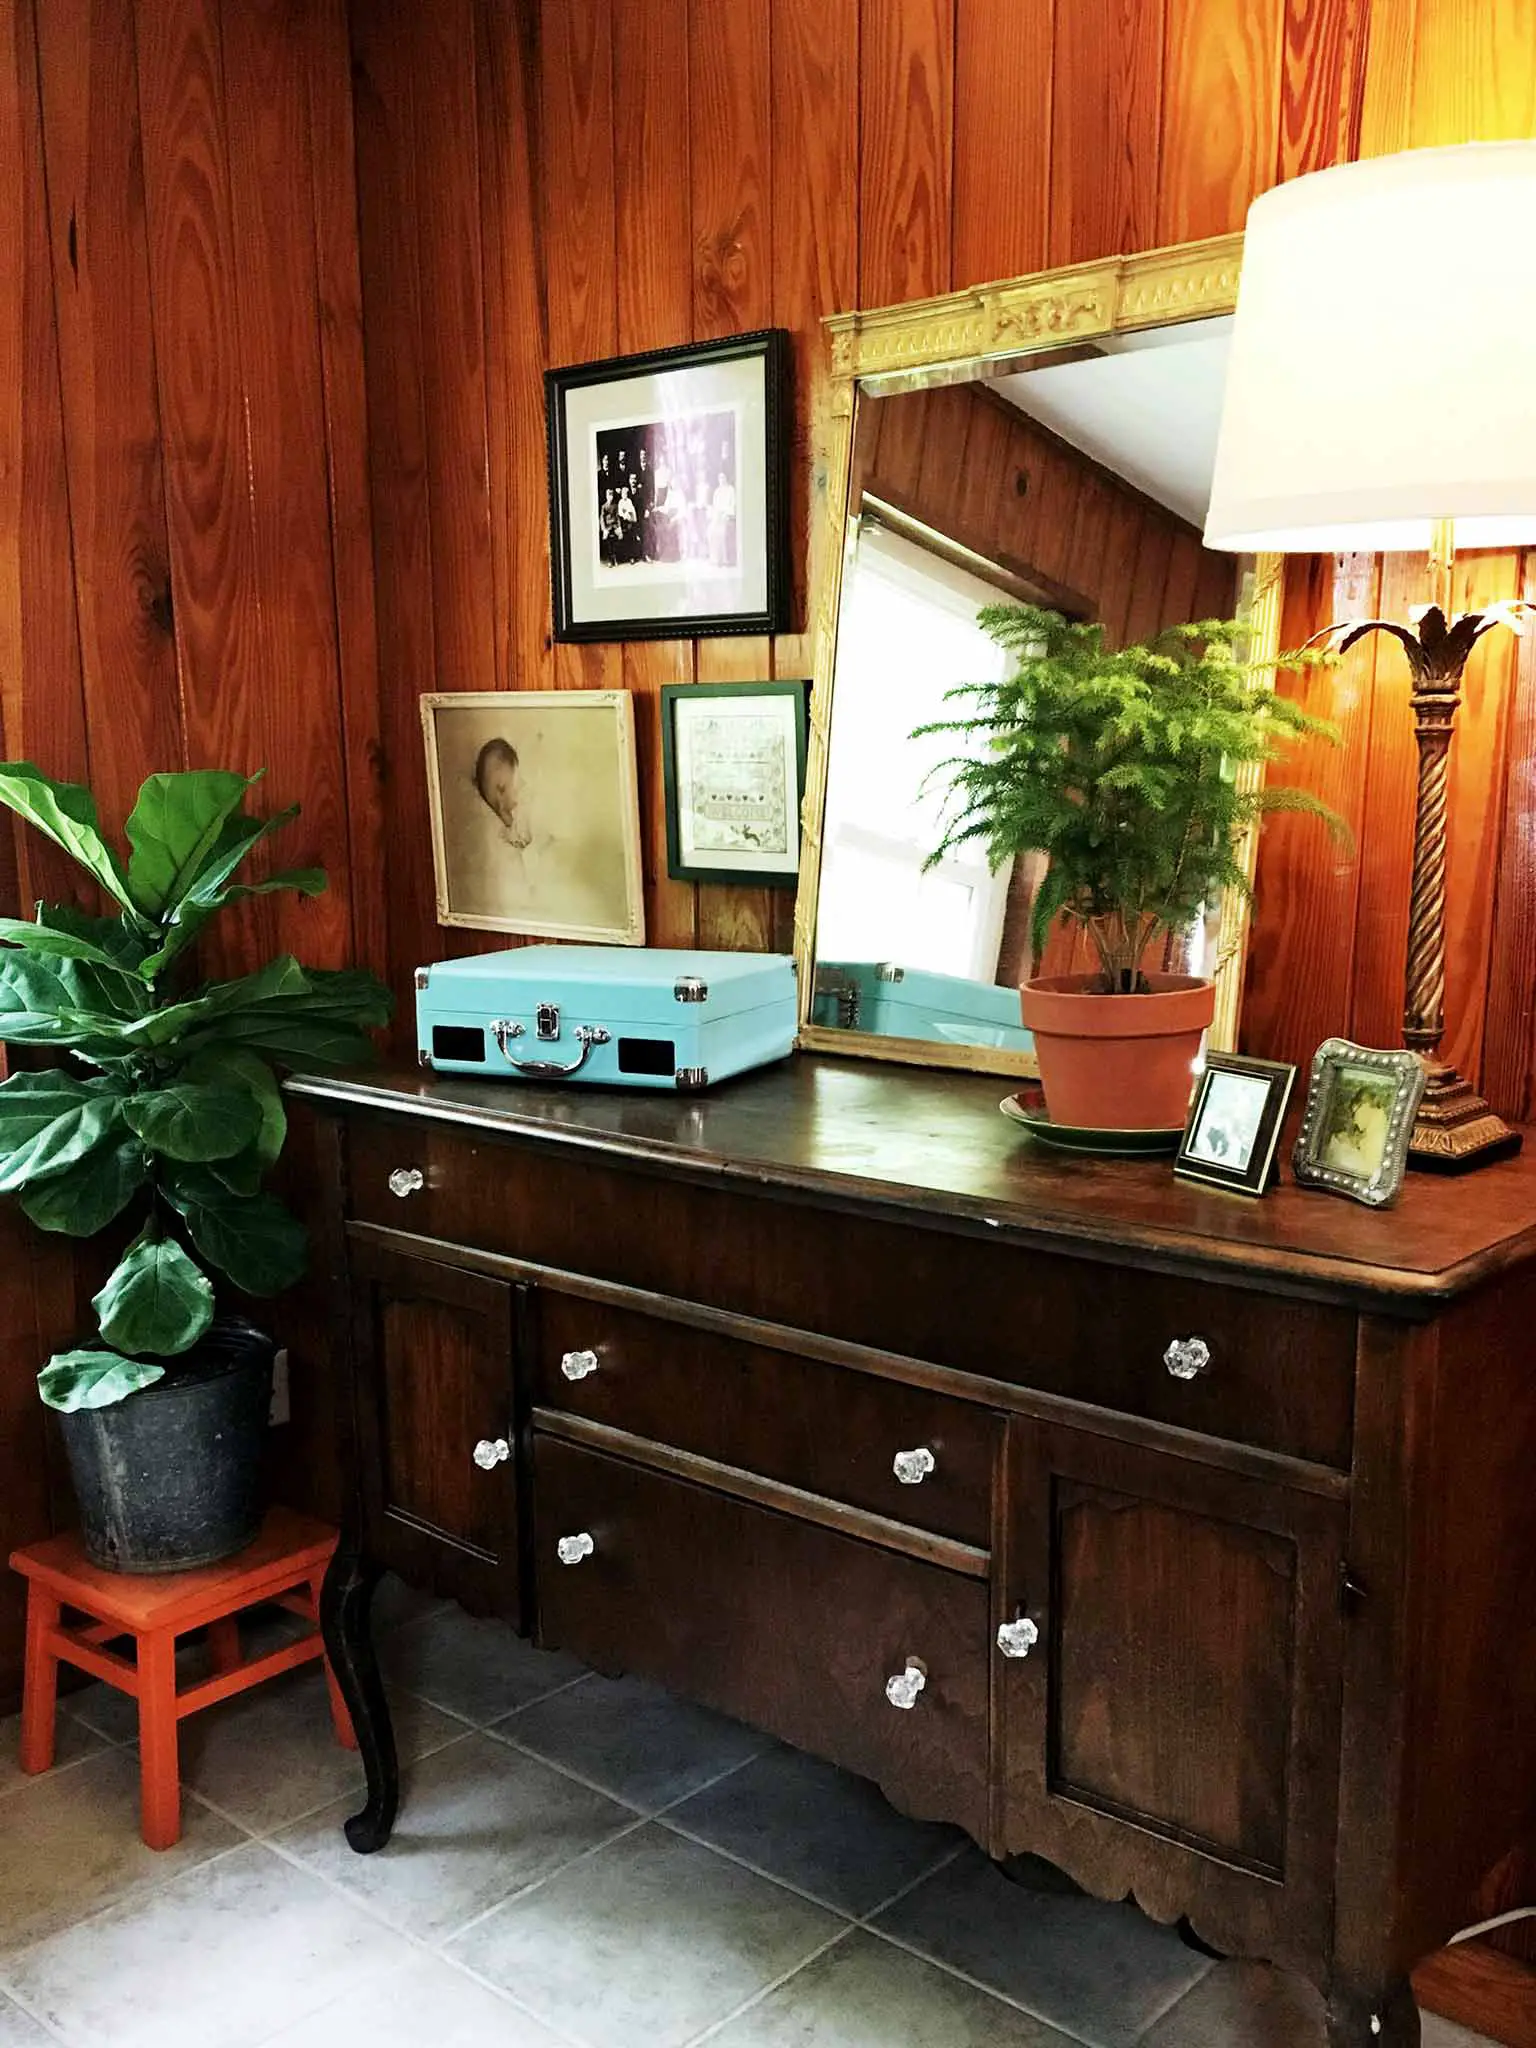 Sideboard and gallery wall - A Cozy & Eclectic Bonus Room Makeover - That Homebird Life Blog